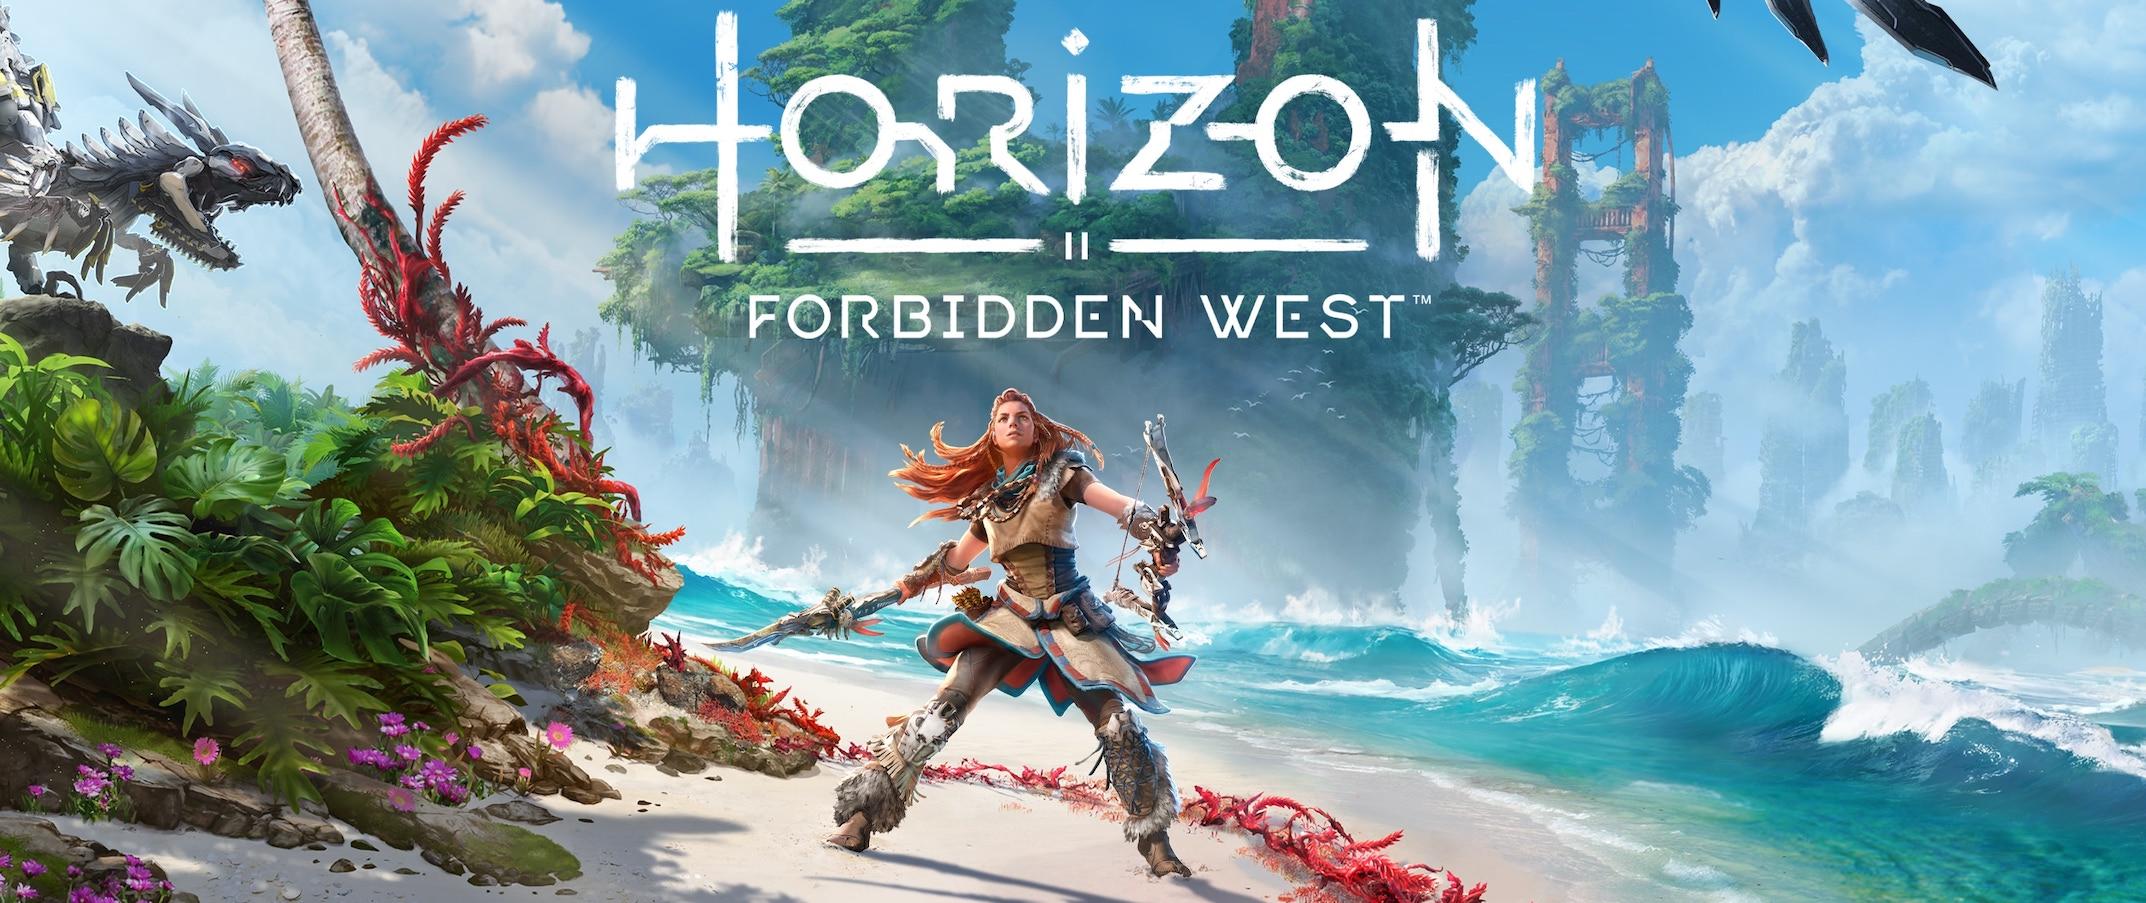 Horizon Forbidden West' is coming to PC next year